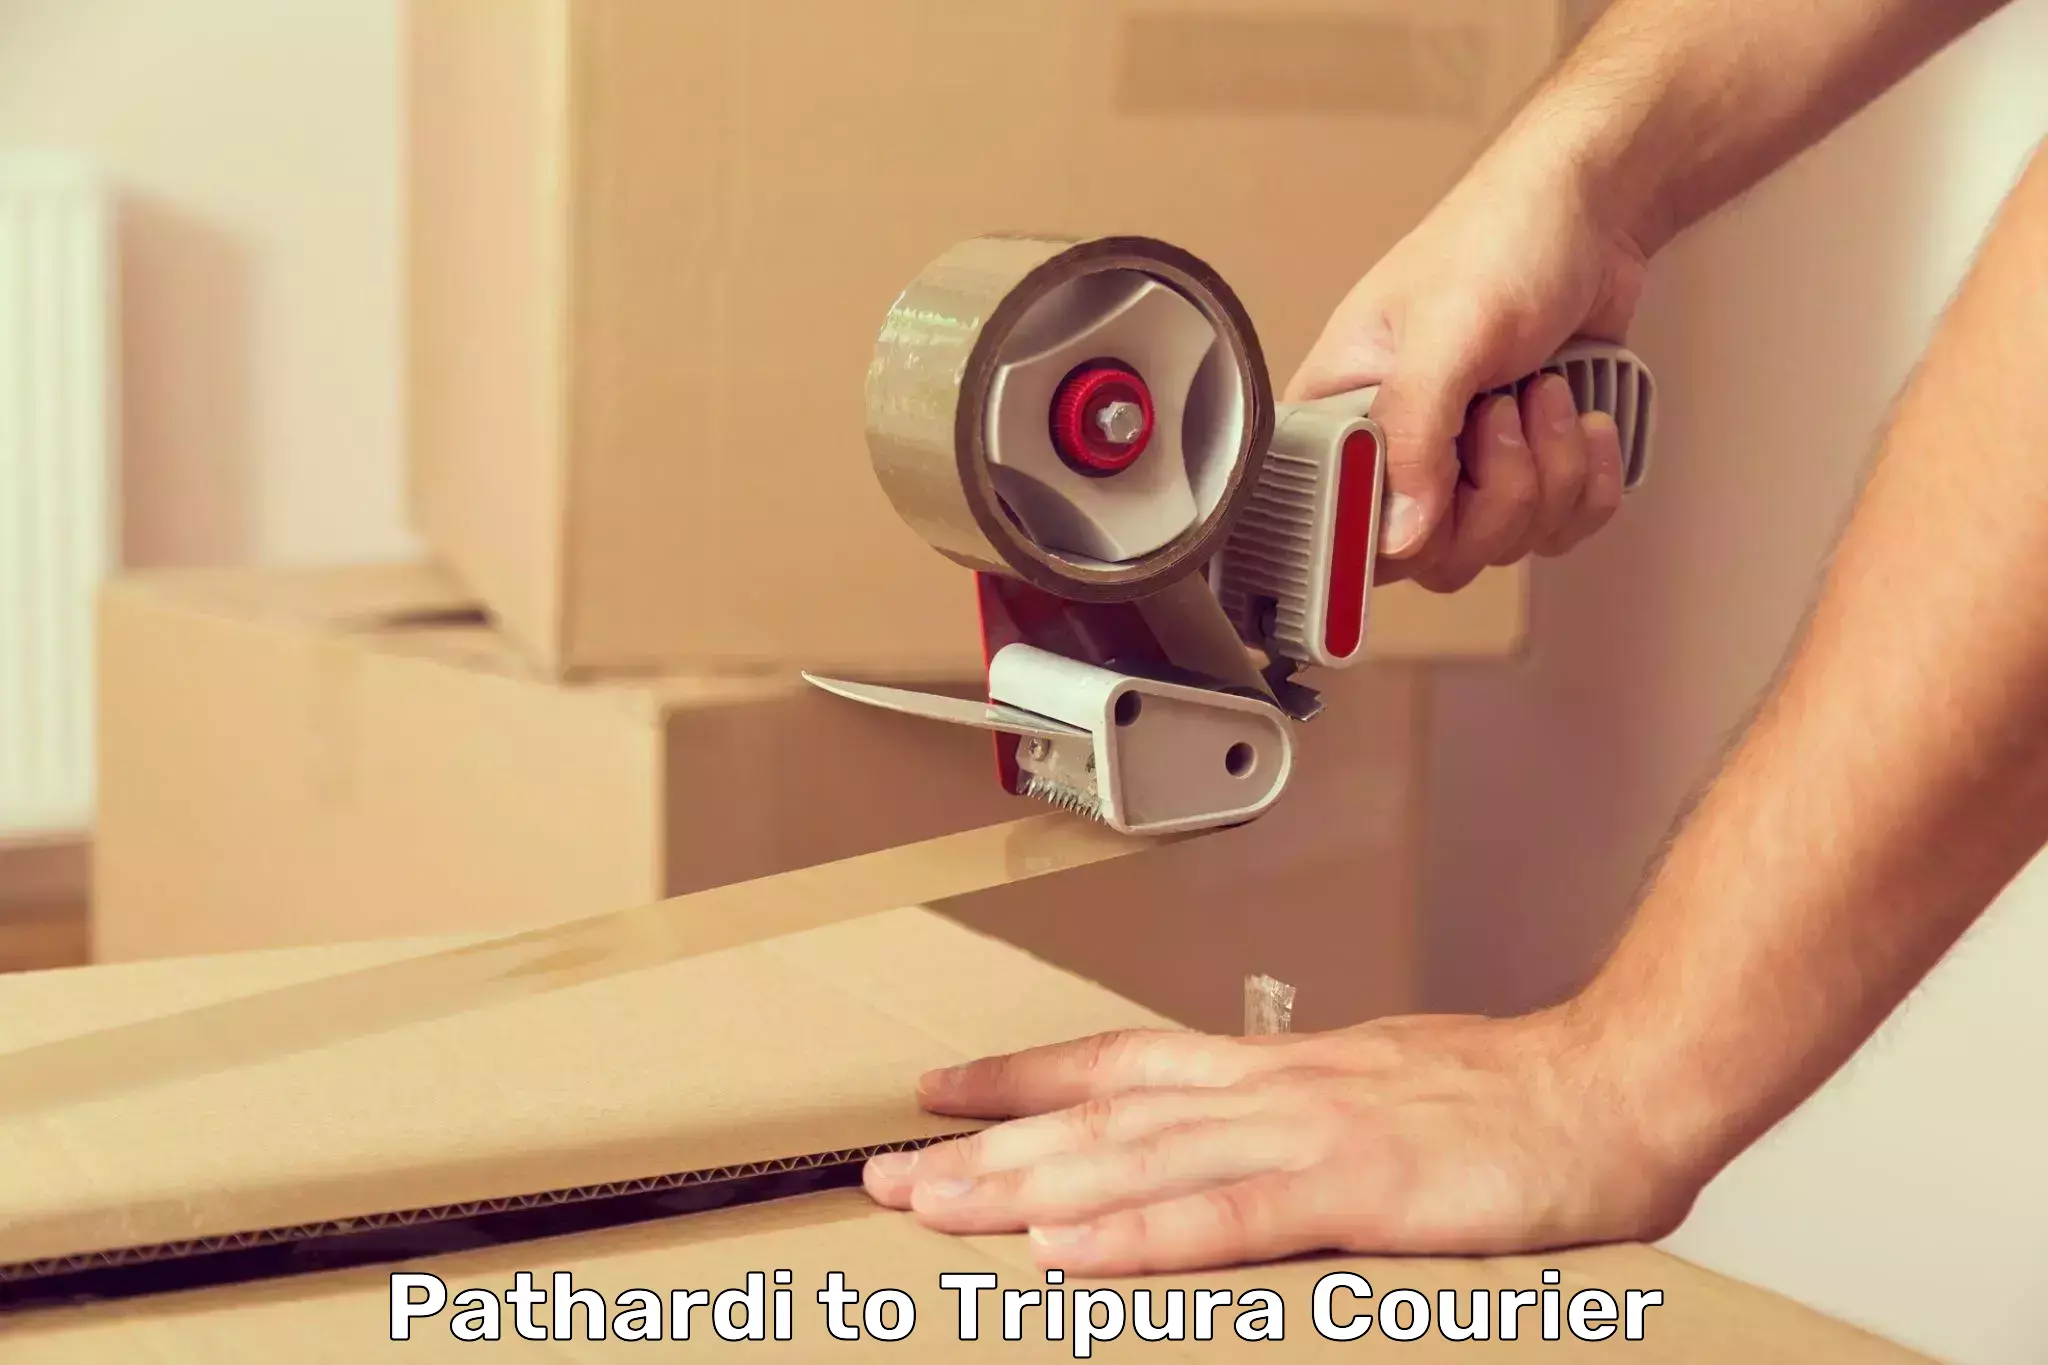 Next-day delivery options Pathardi to Tripura